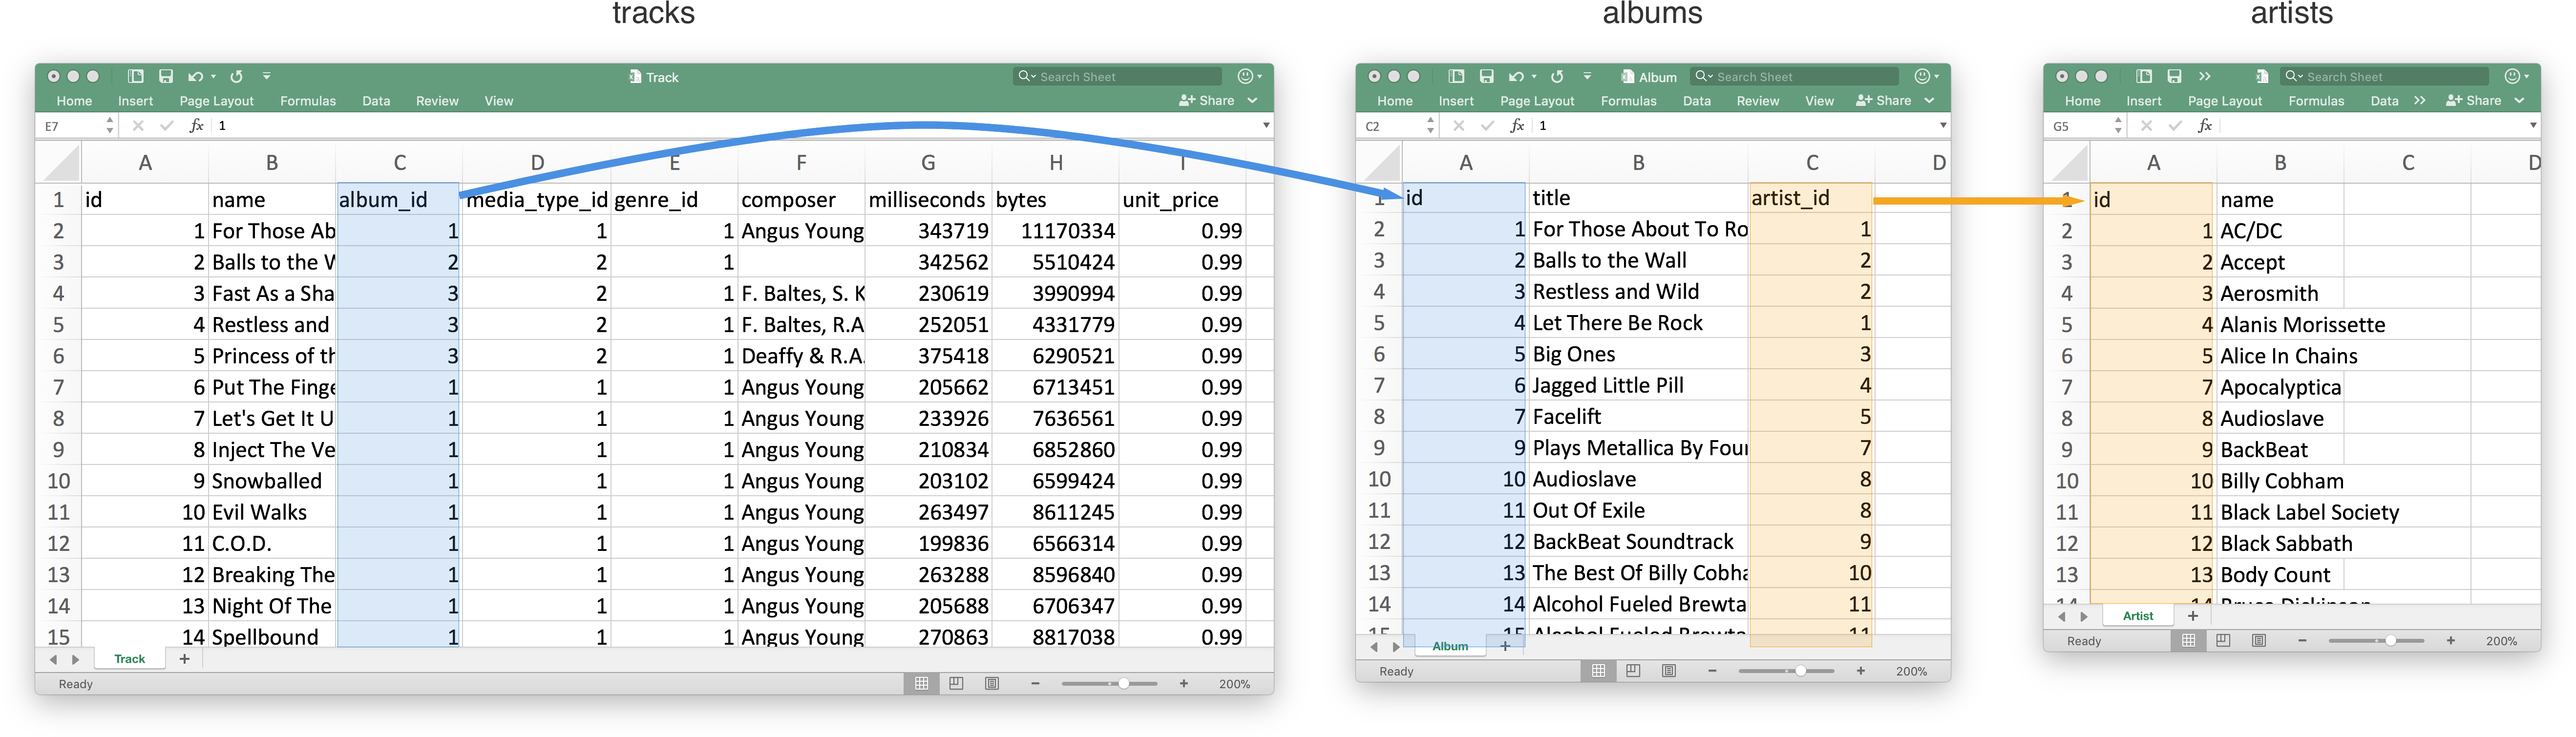 how-to-inner-join-2-tables-in-excel-for-differences-between-values